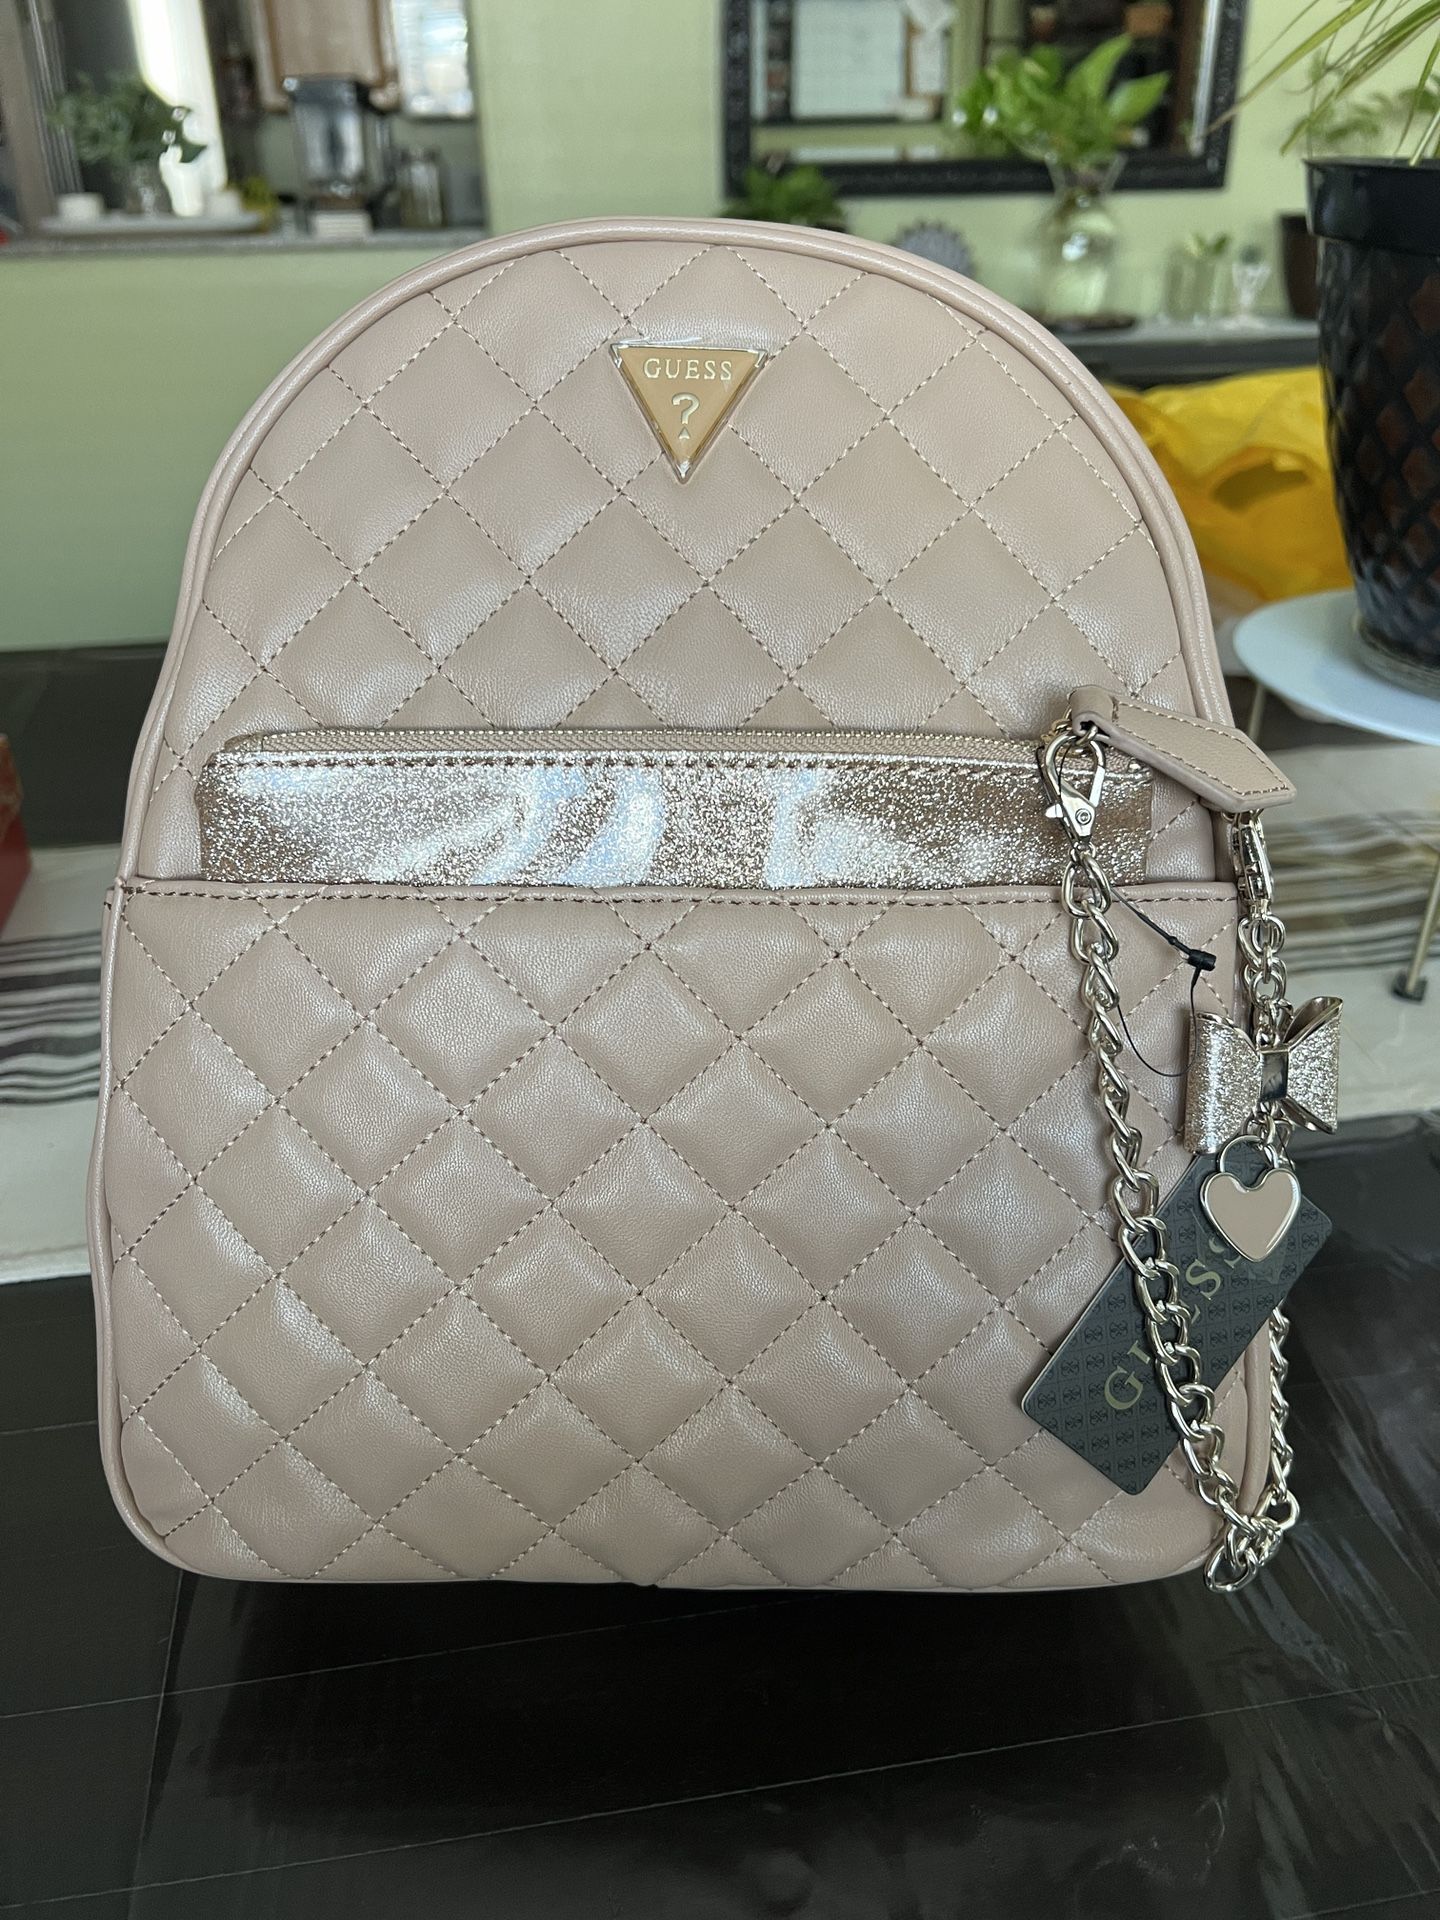 Guess? Backpack Purse Color Nude